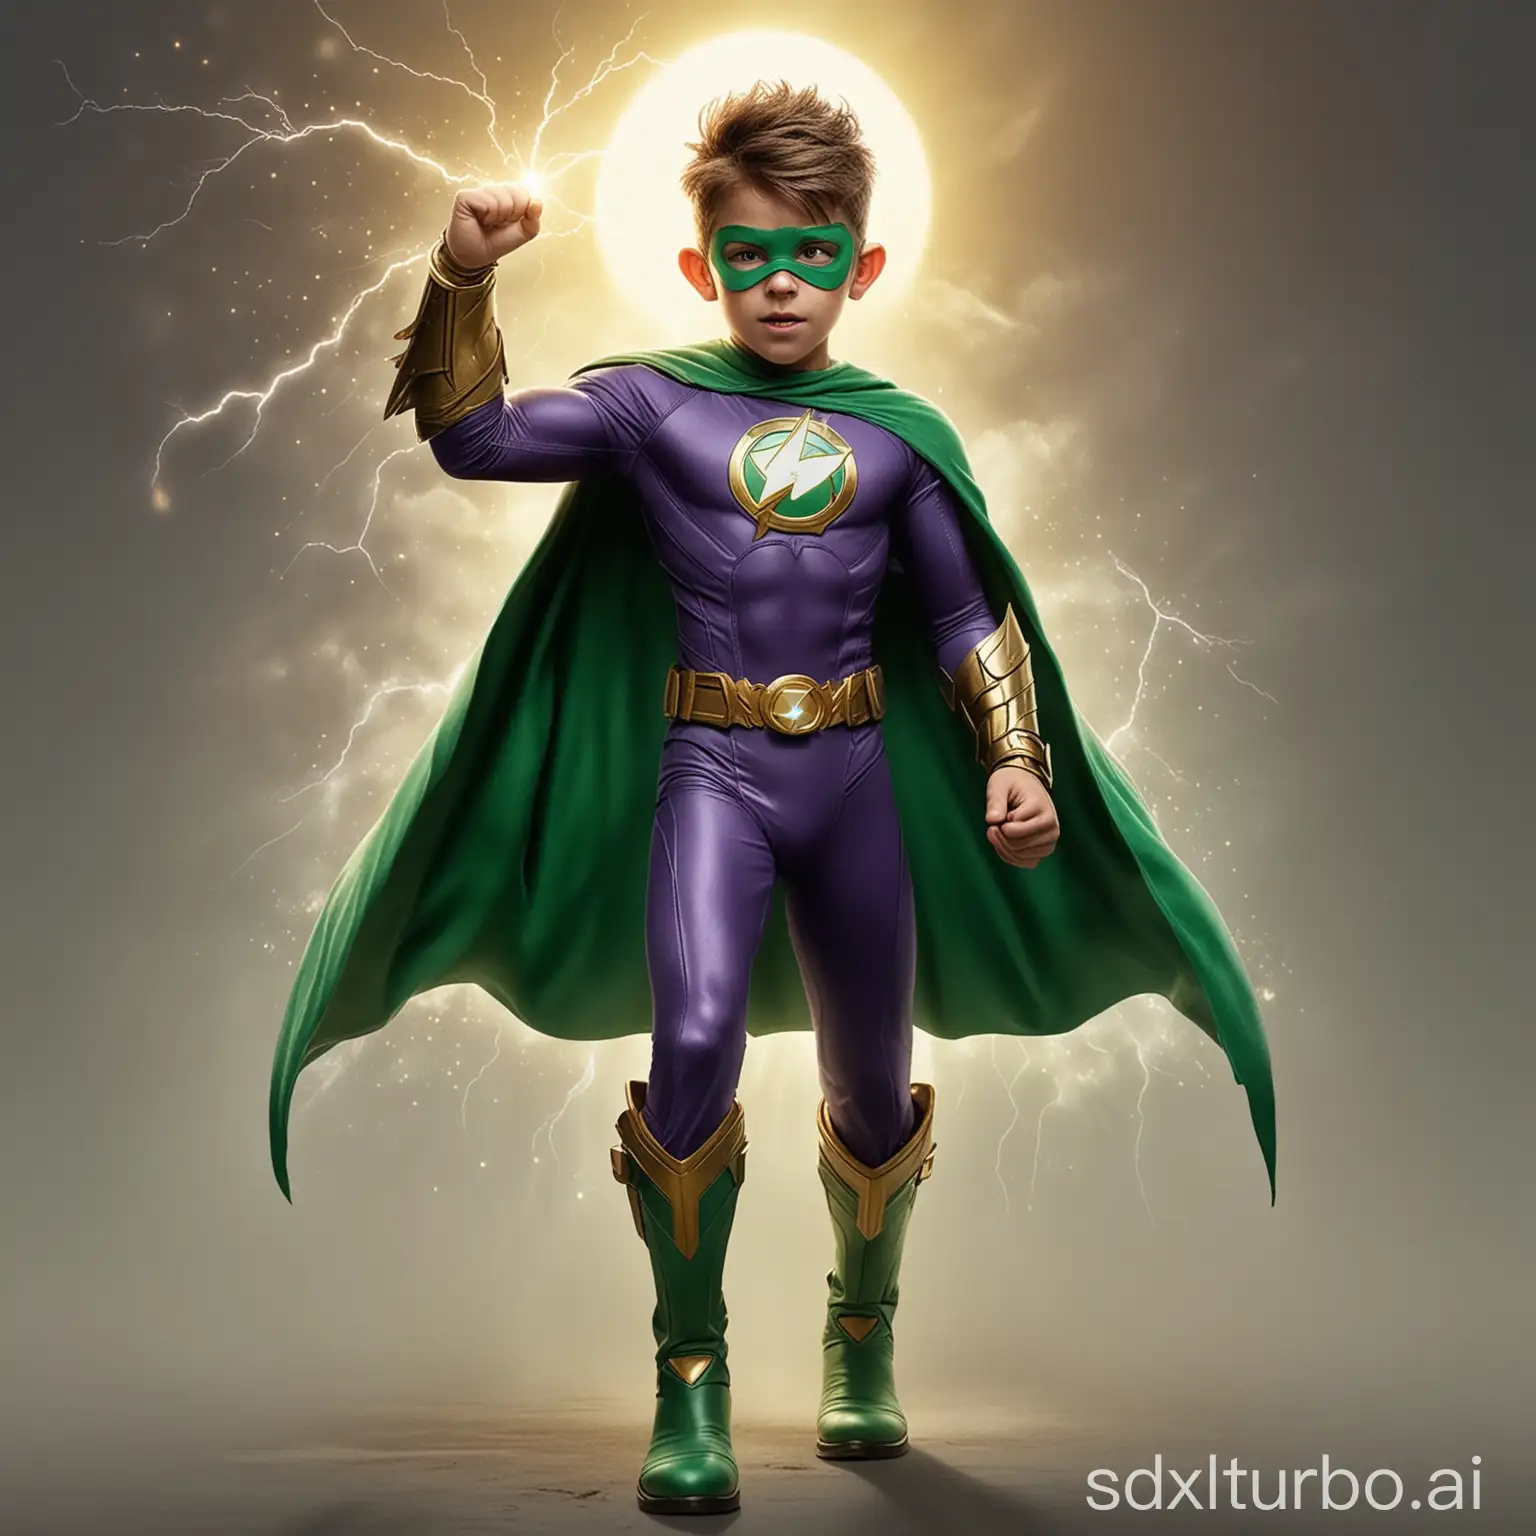 A little 12-year old boy named Connor Bardley, but after he made a wish on a magical shooting star, and now finds himself transformed into a superhero with an extremely muscular body, a sleek purple suit, green boots, green long-cuffed gloves, green briefs, a gold belt, a big green cape, and a green eye mask. His hair is now flat and smooth, with a singular curled bang sticking out at the front in the shape of a P. He has a symbol on his chest, a green hollow circle on top of a yellow whole circle, with a cyan lightning bolt on top of them, and on top of all three is a green P. He also finds himself with incredible superpowers flowing through his veins. Thus, Connor Bardley has now become... Powerboy. He is currently standing in his bedroom at night, his transformation complete, and is now ready for action.